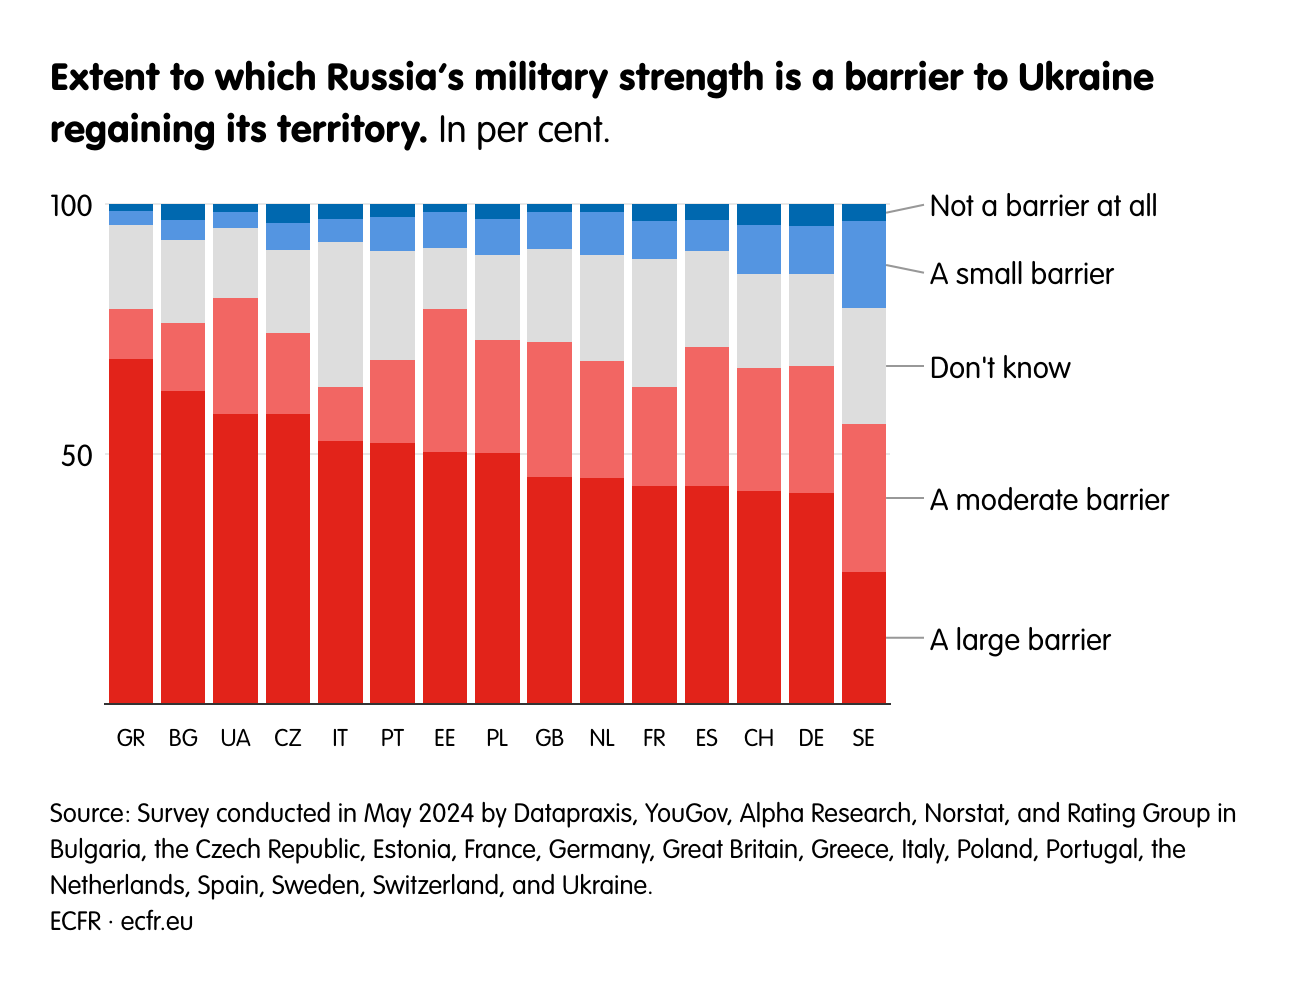 Extent to which Russia’s military strength is a barrier to Ukraine regaining its territory.